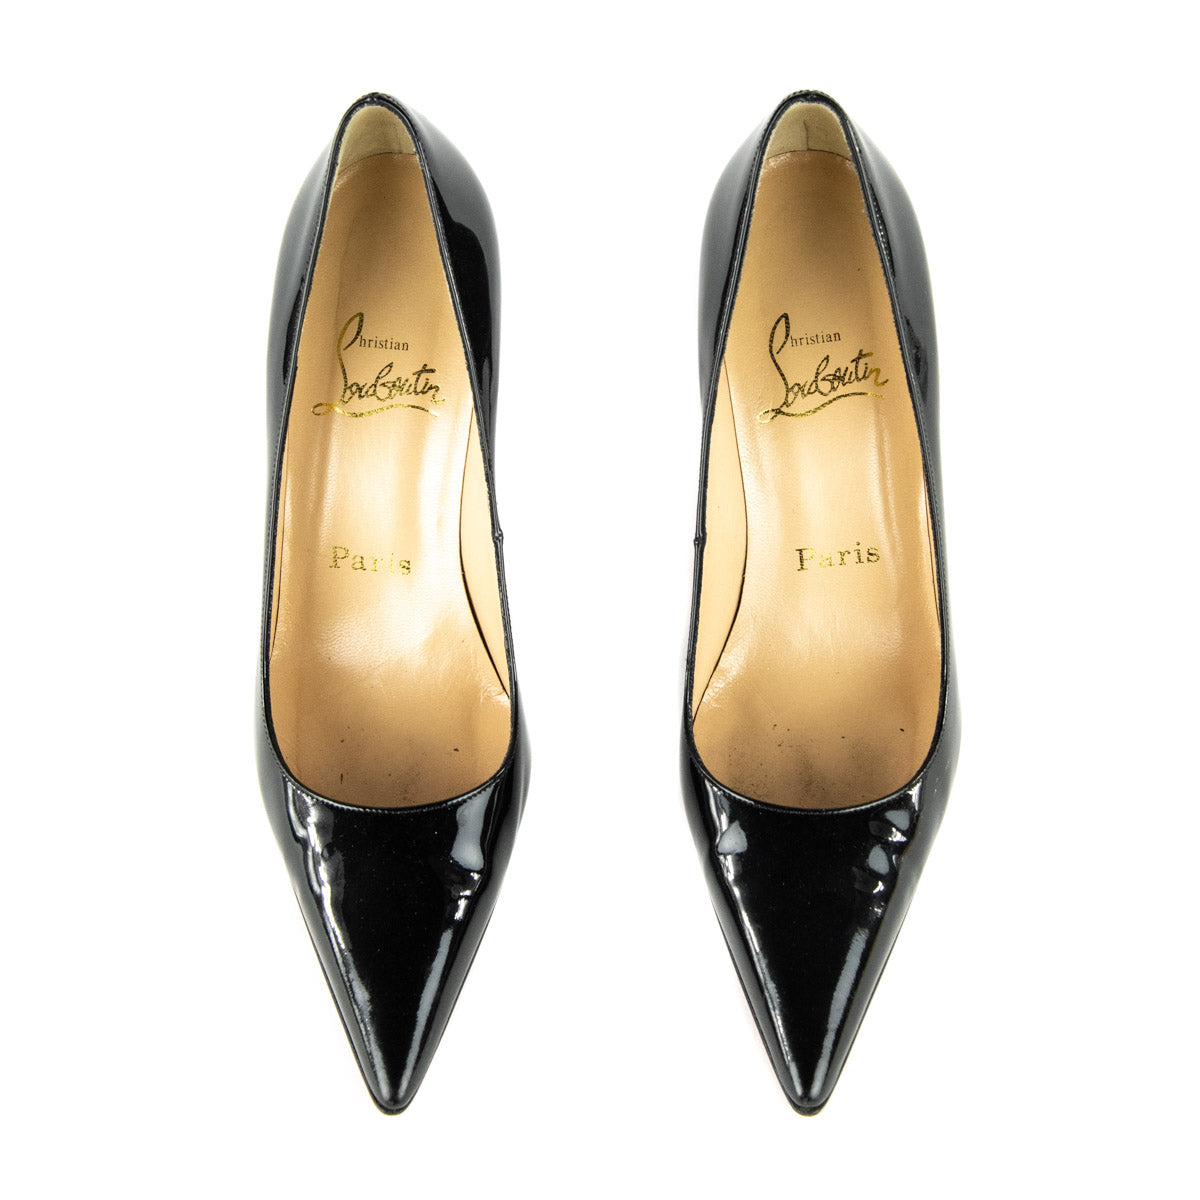 Christian Black Patent Leather Pointed Toe Pumps